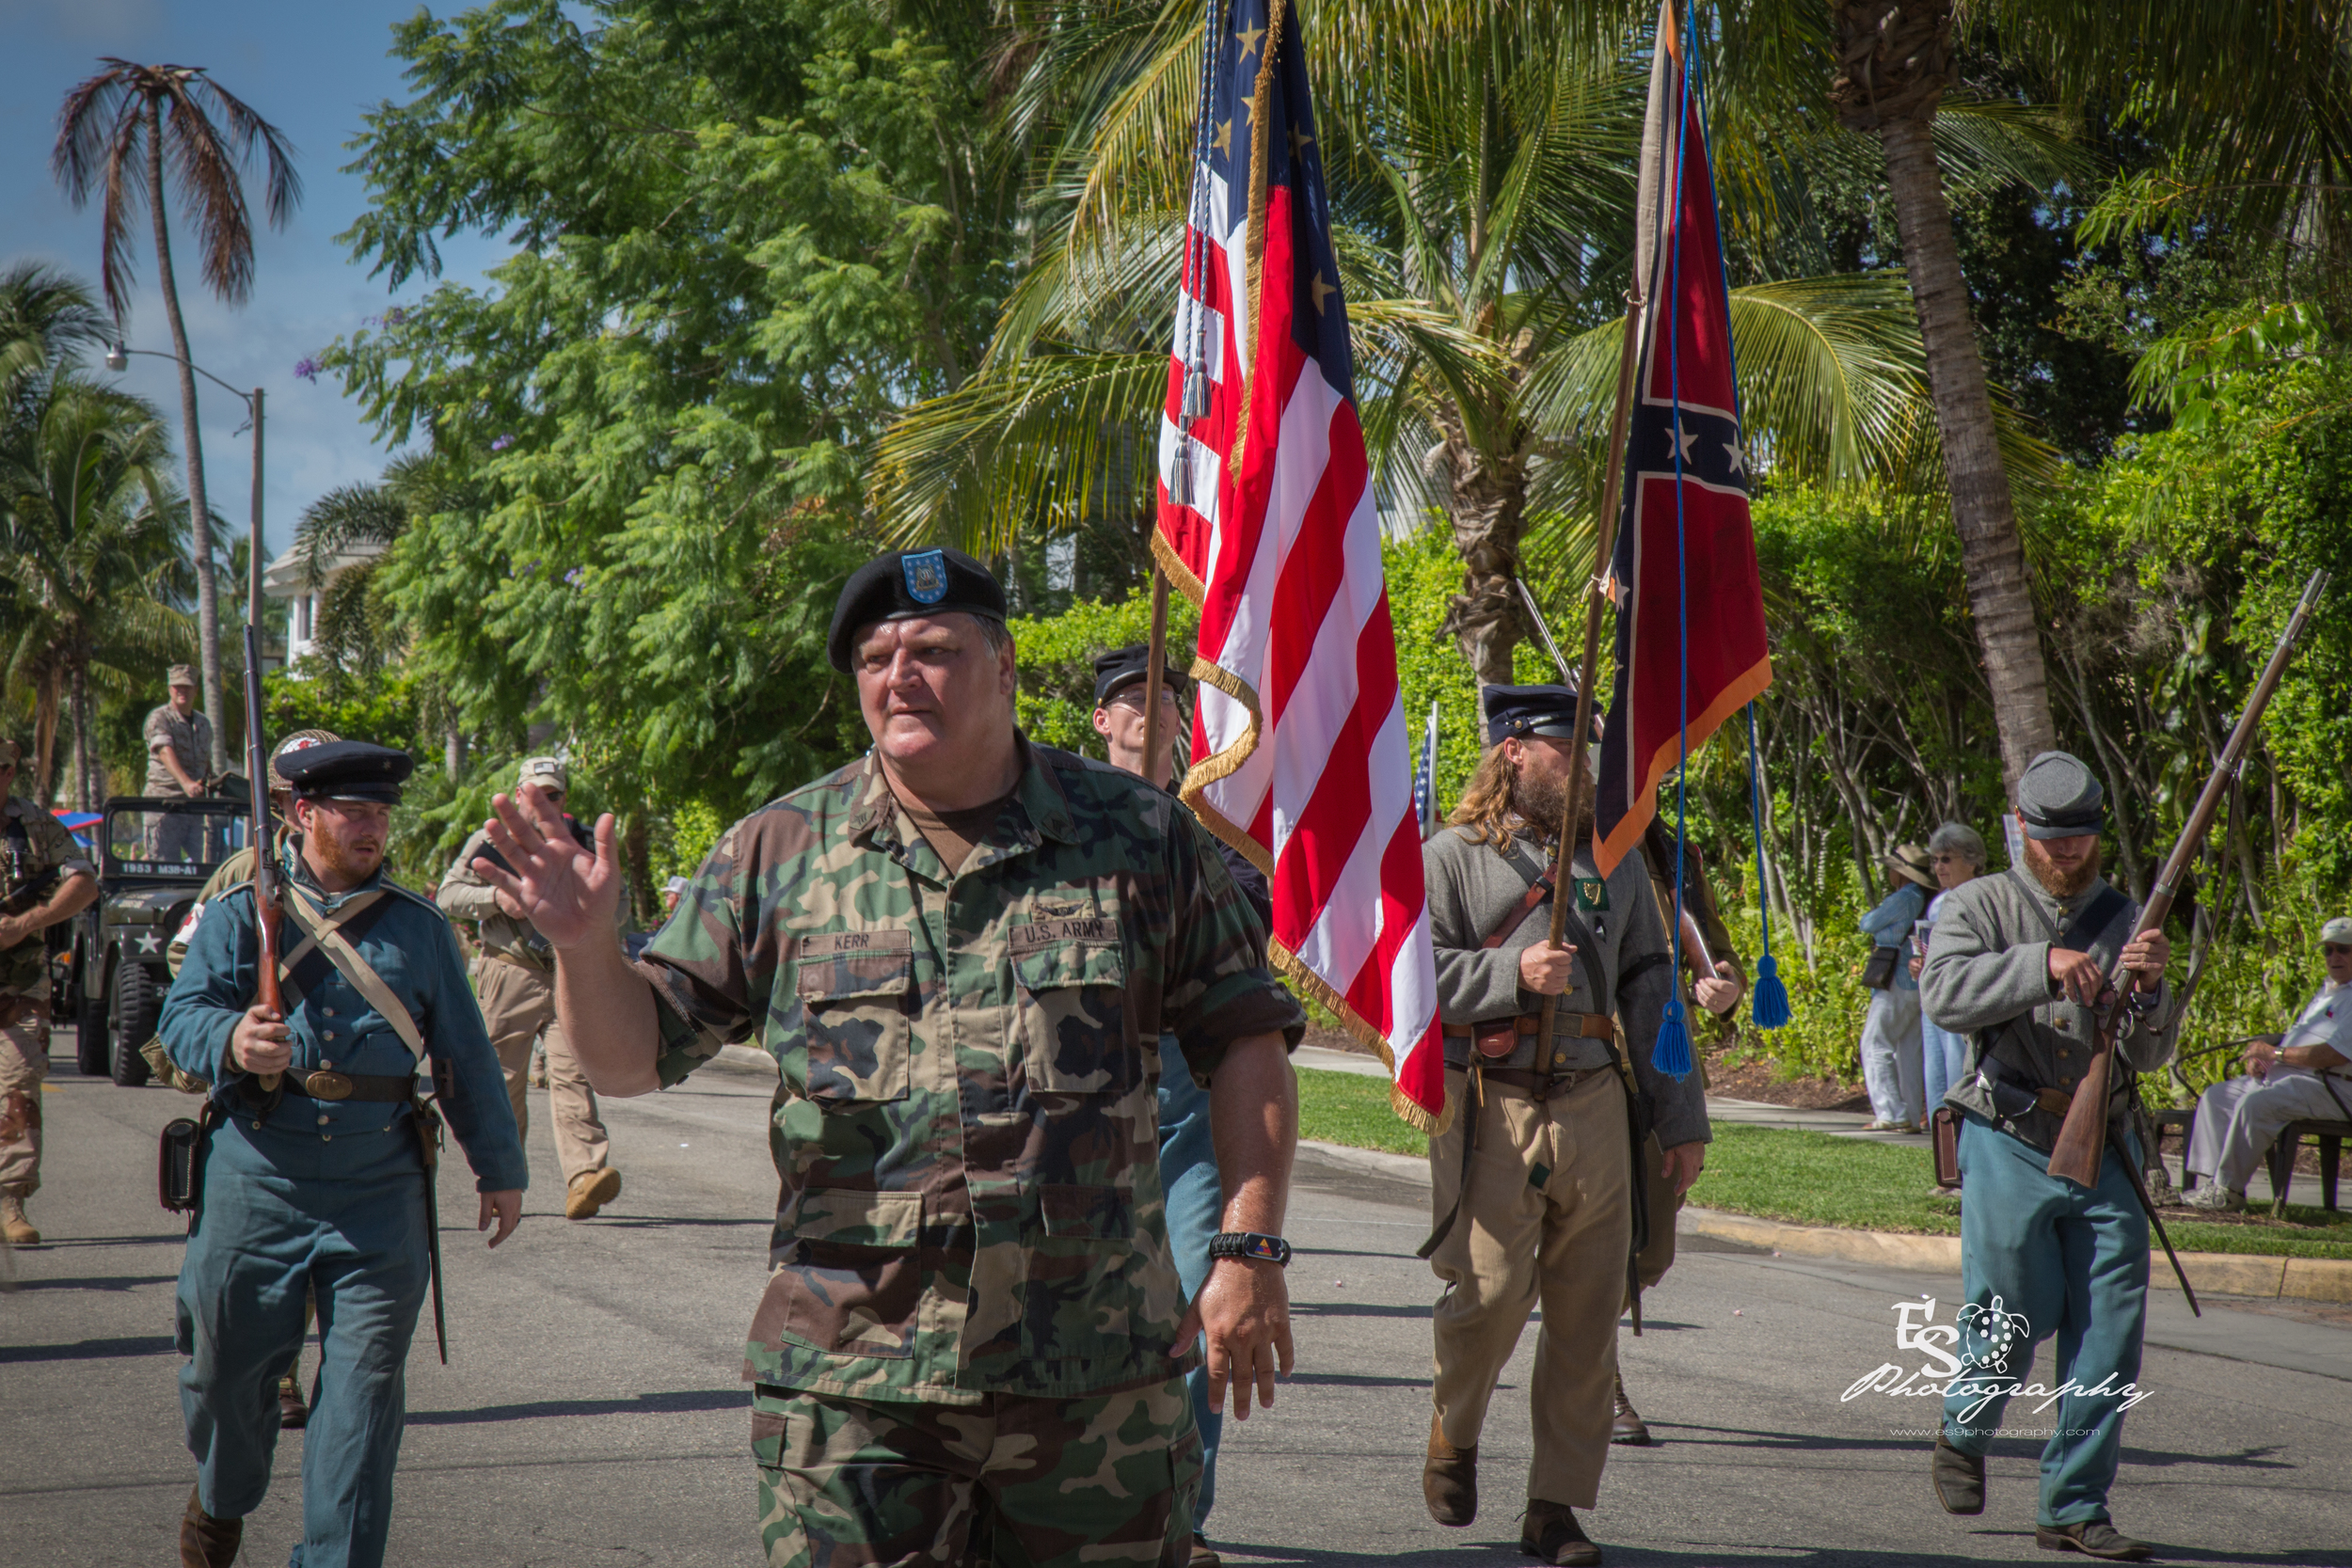 City of Naples July 4th Parade 2016 @ ES9 Photography 2016-9.jpg